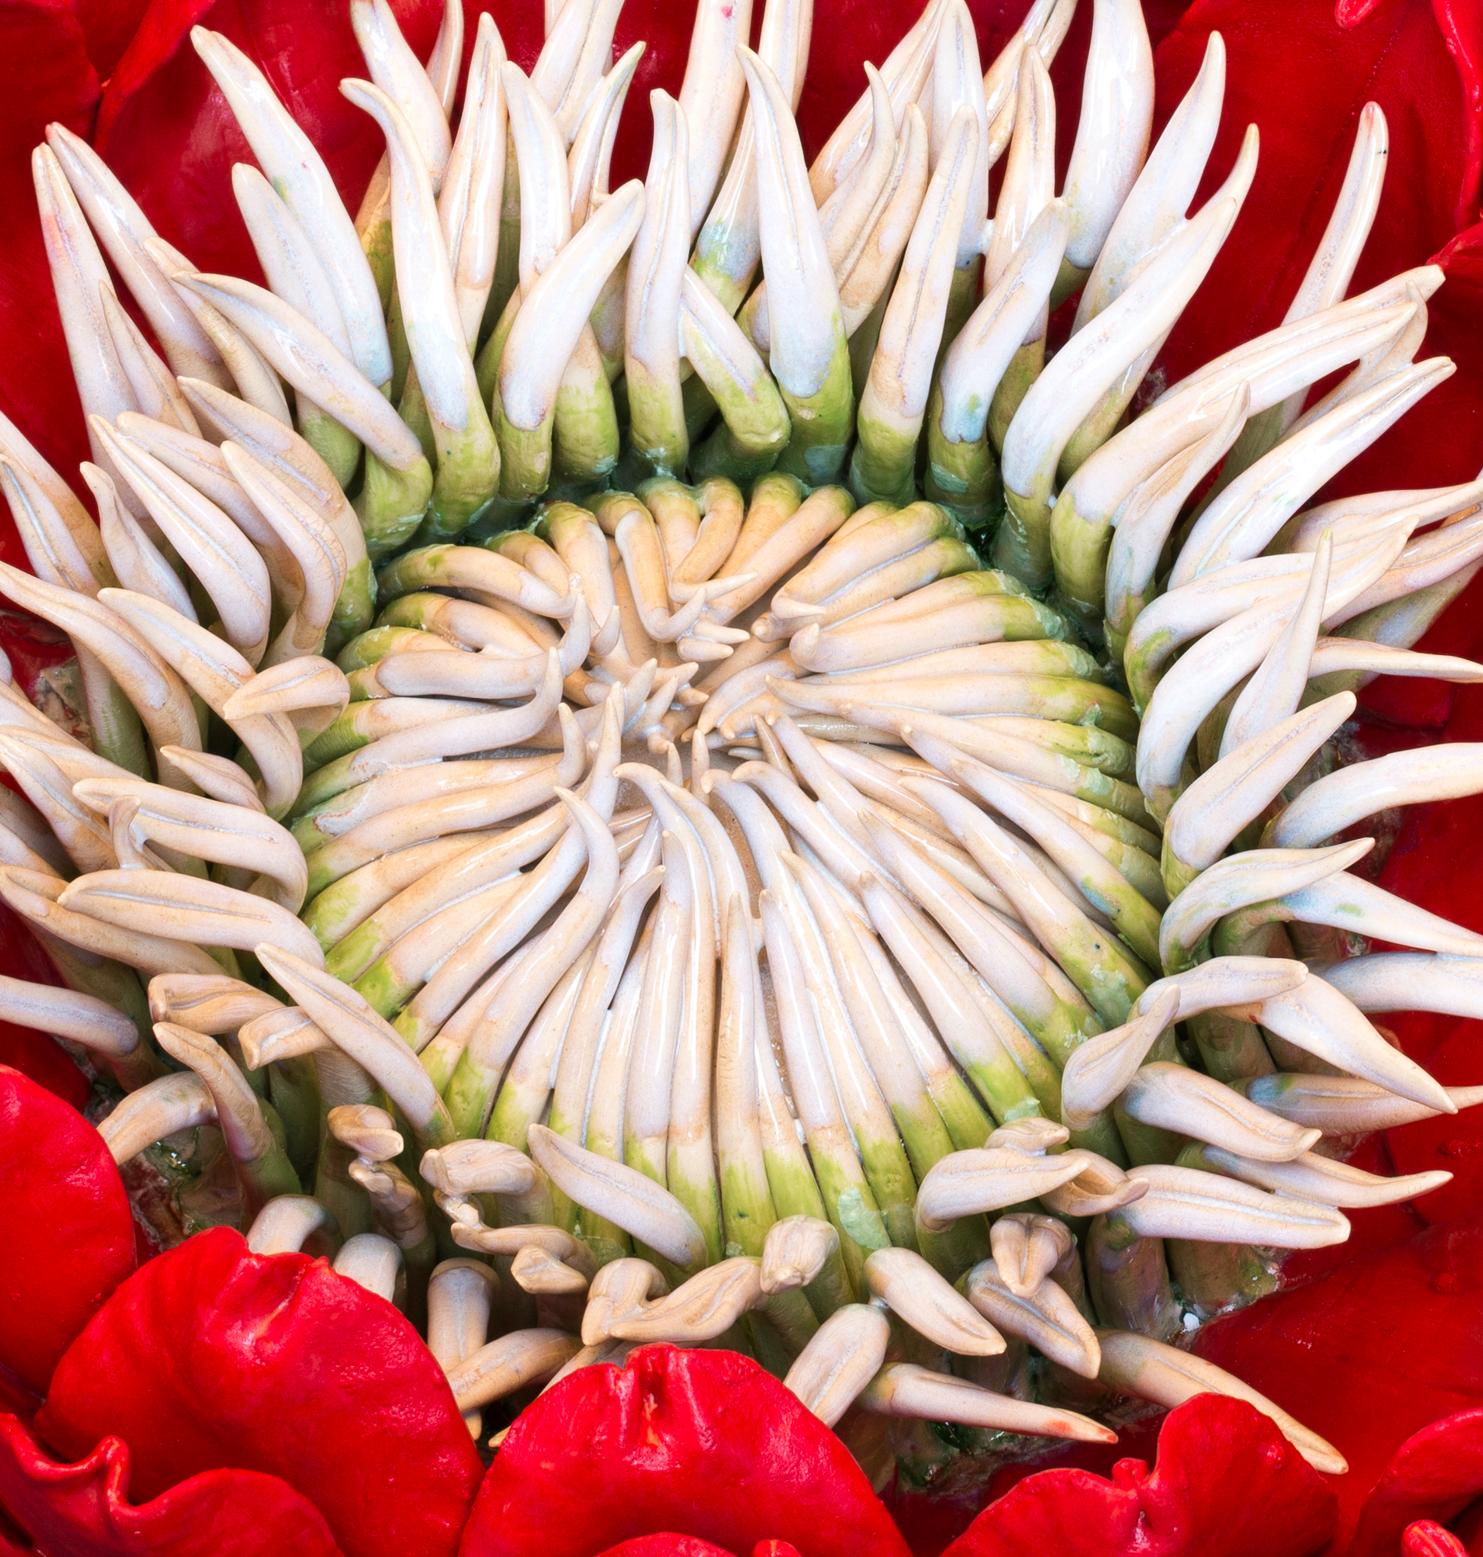 Red Protea - the secret worlds inside these flowers, red, white, green, yellow - Sculpture by Frances Doherty